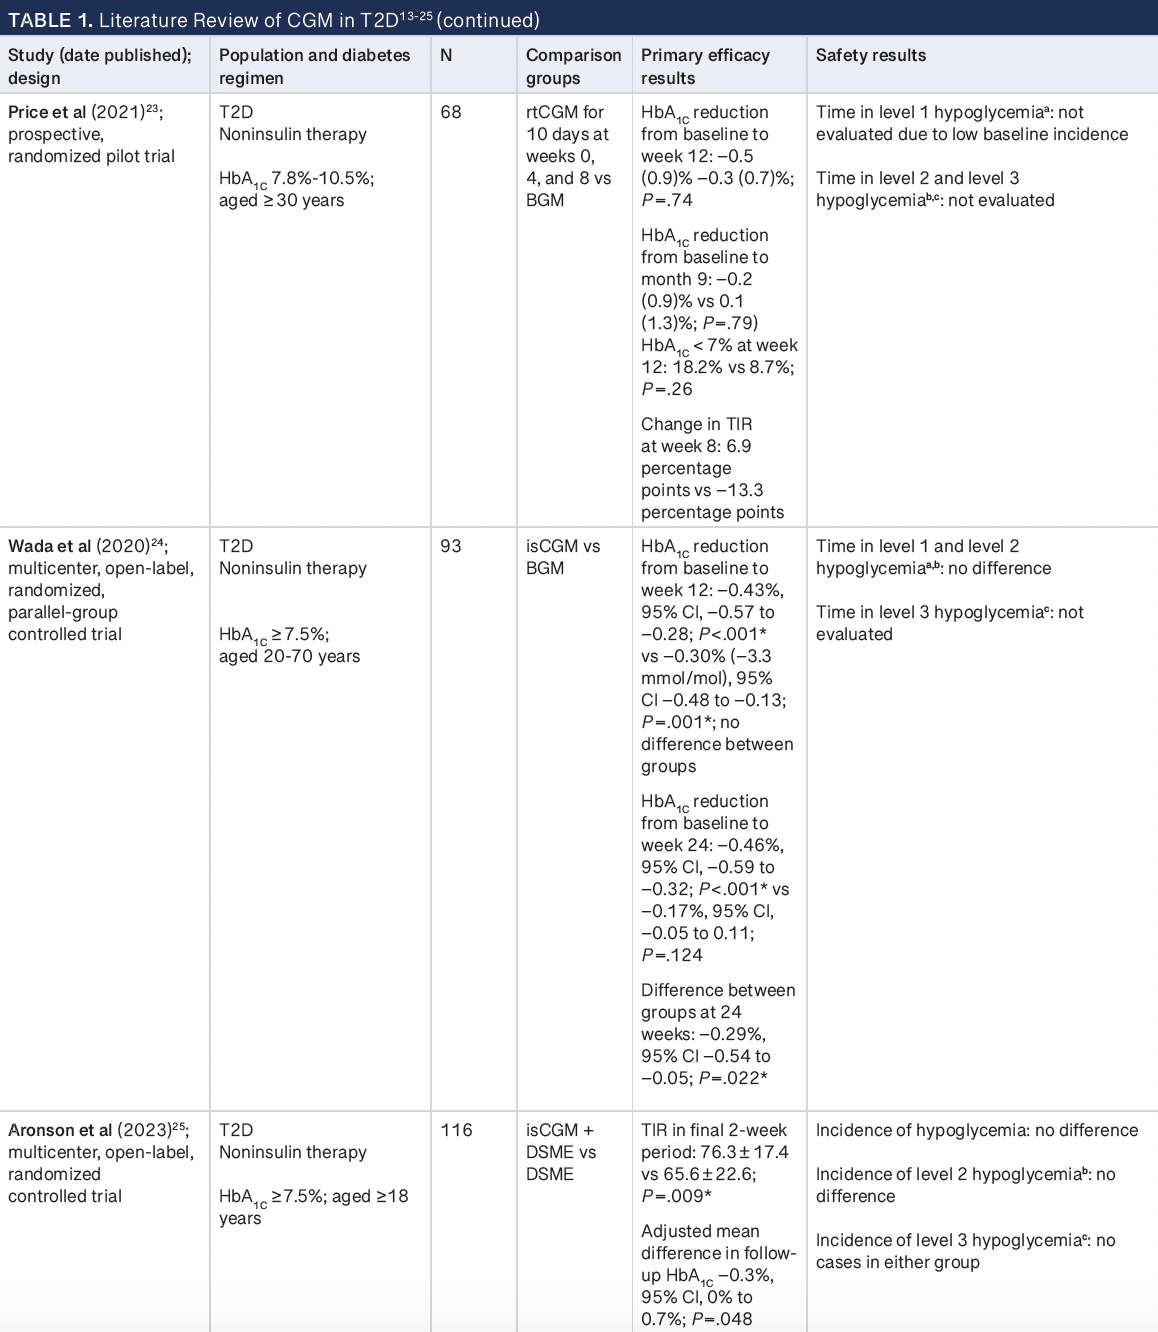 Table 1: Literature Review of CGM in T2D -- BGM, blood glucose monitoring; CGM, continuous glucose monitor; DSME, diabetes self-management education; HbA1C, hemoglobin A1C; isCGM, intermittently scanned CGM; rtCGM, real-time CGM; T1D, type 1 diabetes; T2D, type 2 diabetes ; TIR, time in range.  aLevel 1 hypoglycemia: blood glucose concentration < 70 mg/dL (3.9 mmol/L) but ≥ 54 mg/dL (3.0 mmol/L).  bLevel 2 hypoglycemia: blood glucose concentration < 54 mg/dL (3.0 mmol/L).  cLevel 3 hypoglycemia: severe hypoglycemia event requiring assistance from another person.  *Significant difference.